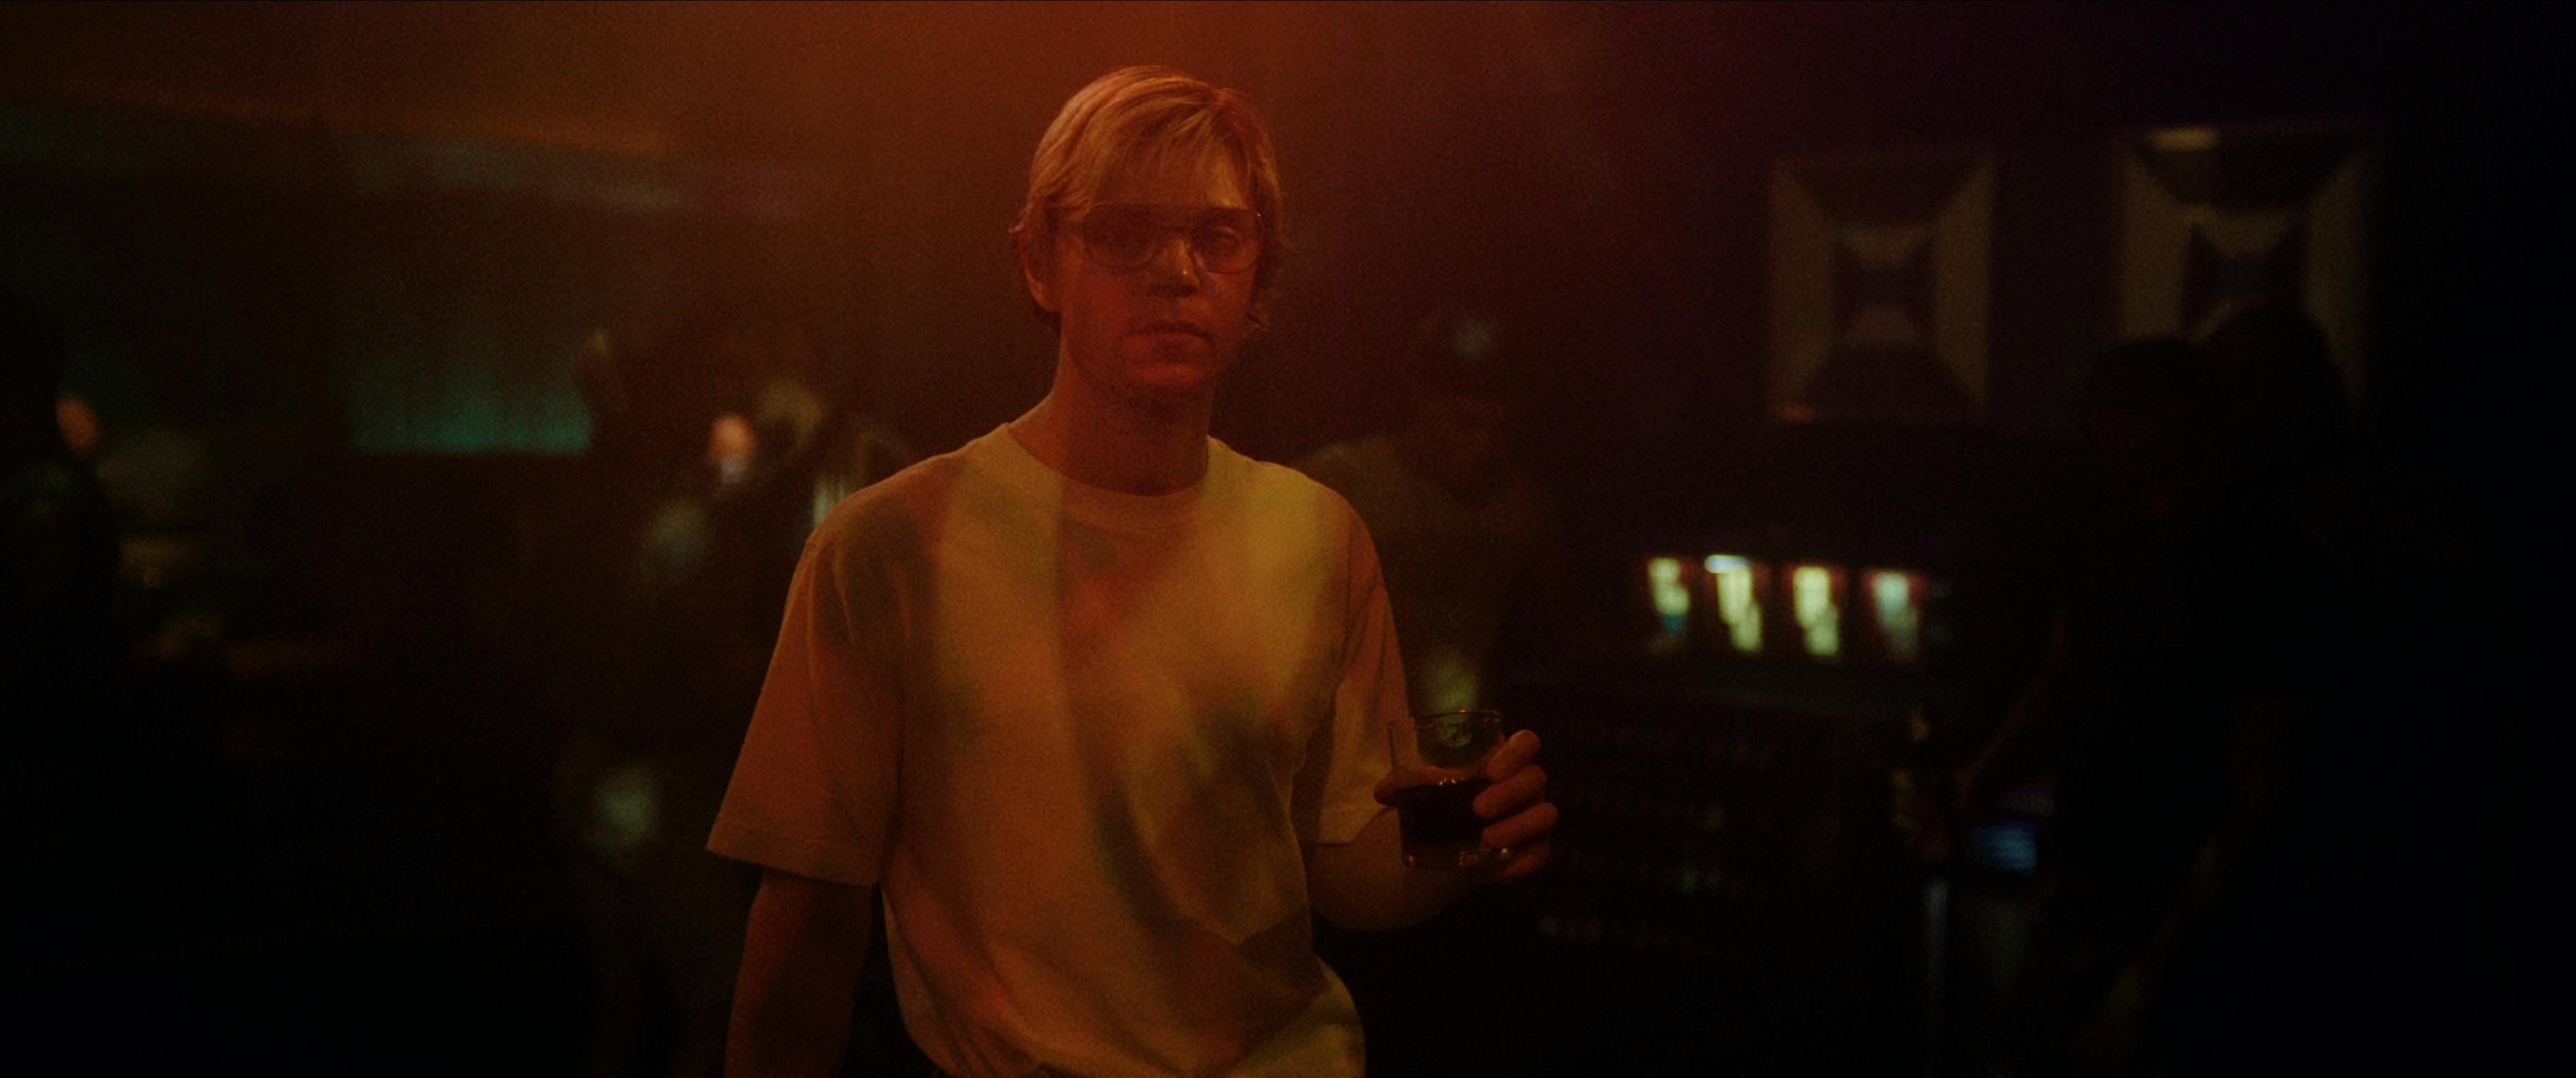 Jeffrey Dahmer (Evan Peters) wears a white t-shirt, glasses, and holds a glass of dark liquid in a smoky dark room.